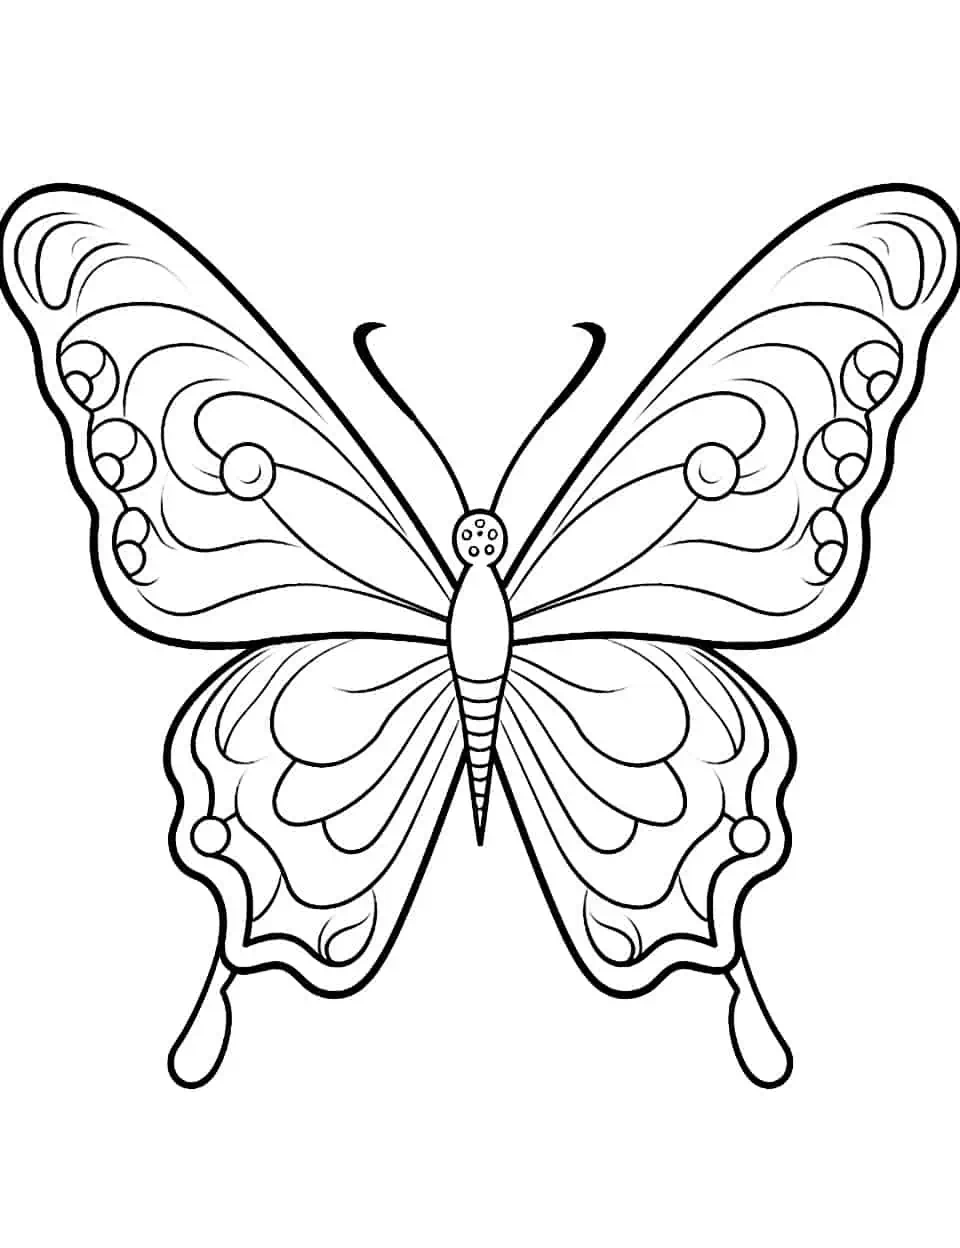 Graceful Flight Butterfly Coloring Page - A coloring page capturing the elegance of a butterfly in mid-flight.